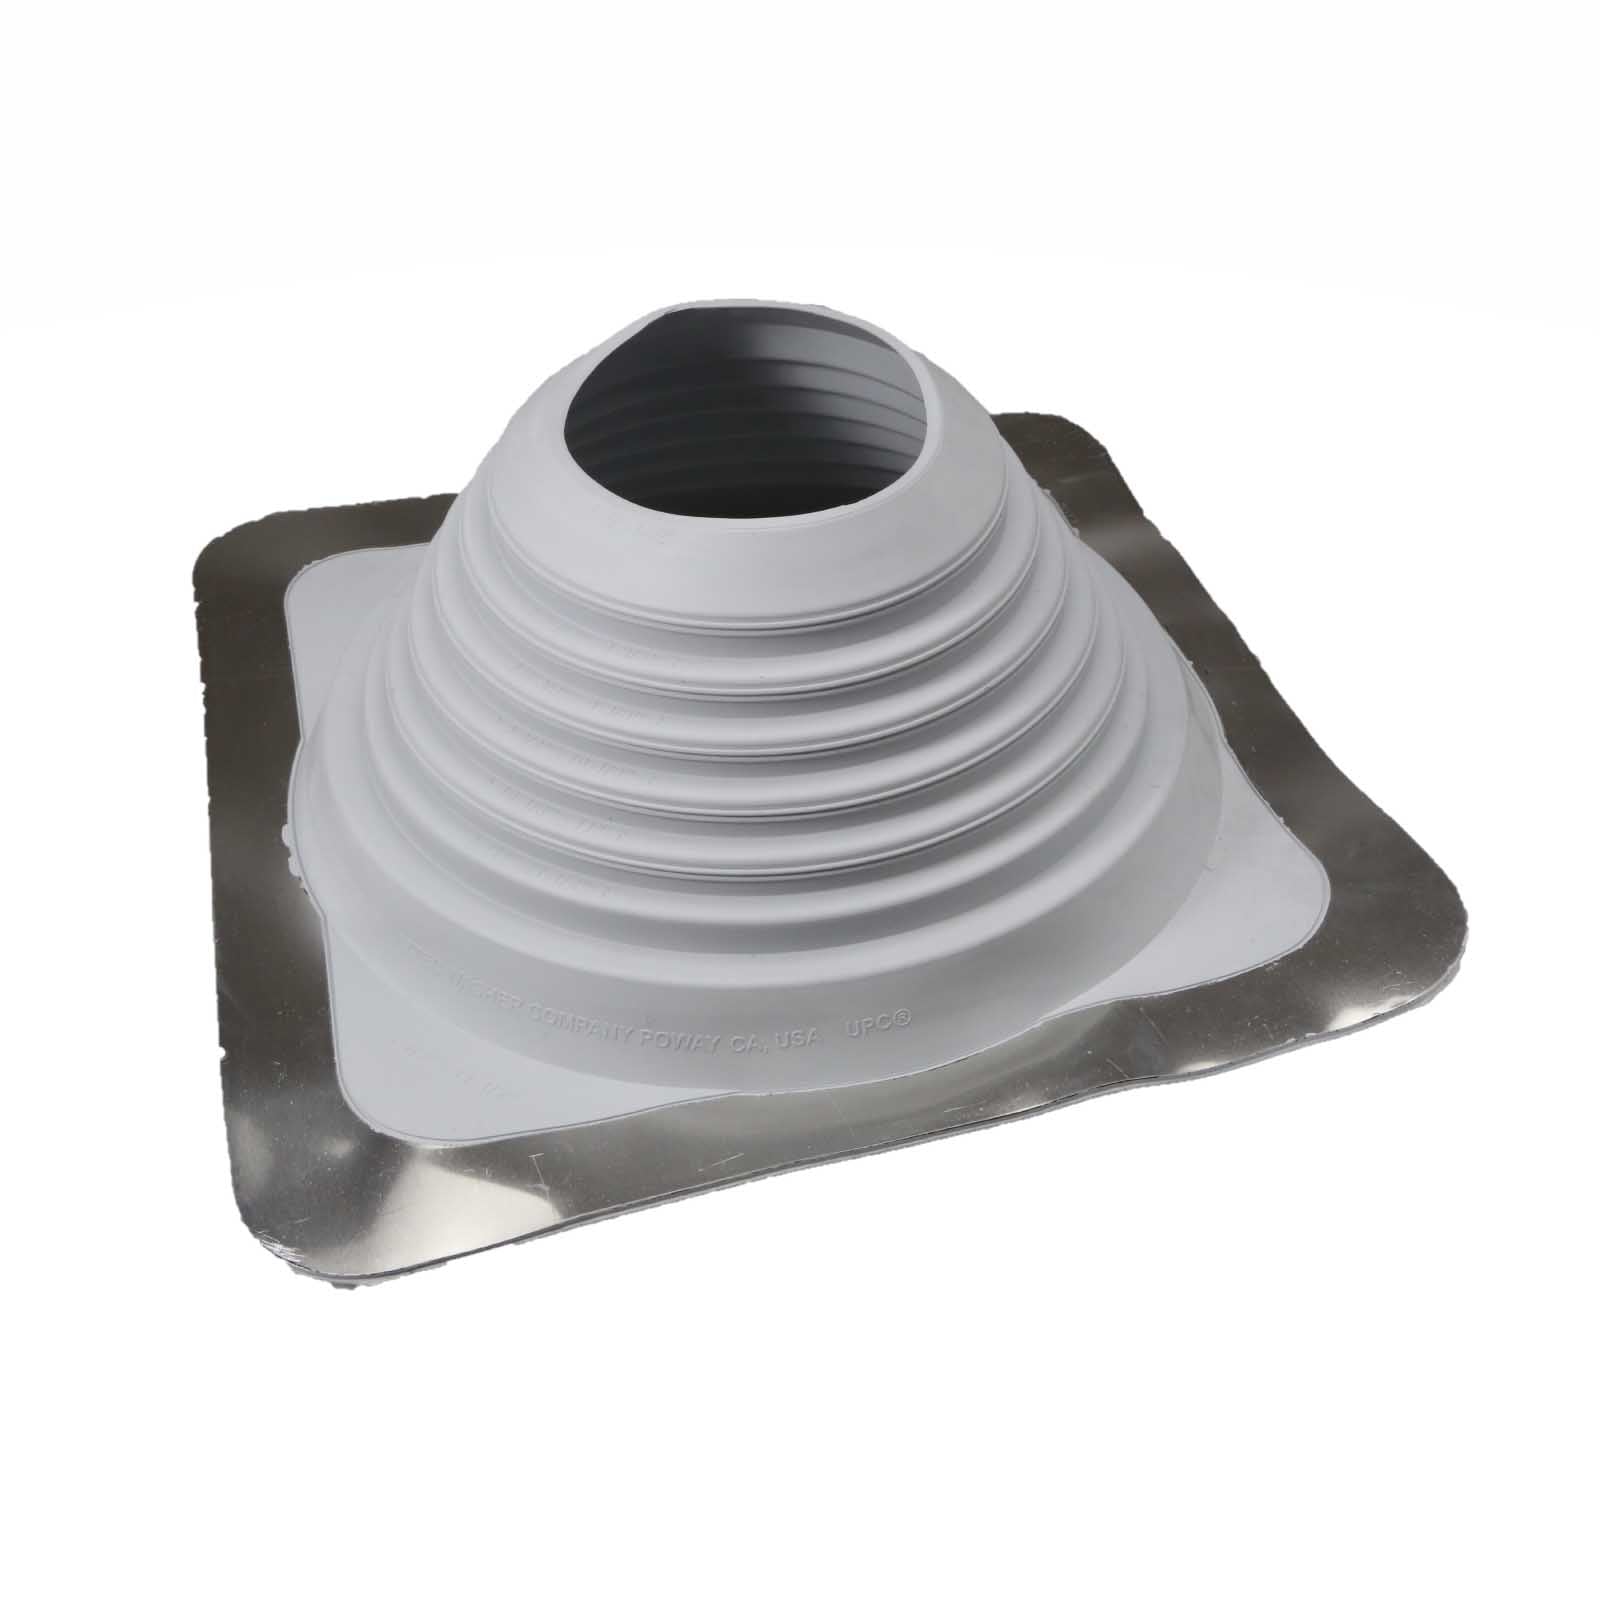 #7 Roofjack Square EPDM Pipe Flashing Boot Gray